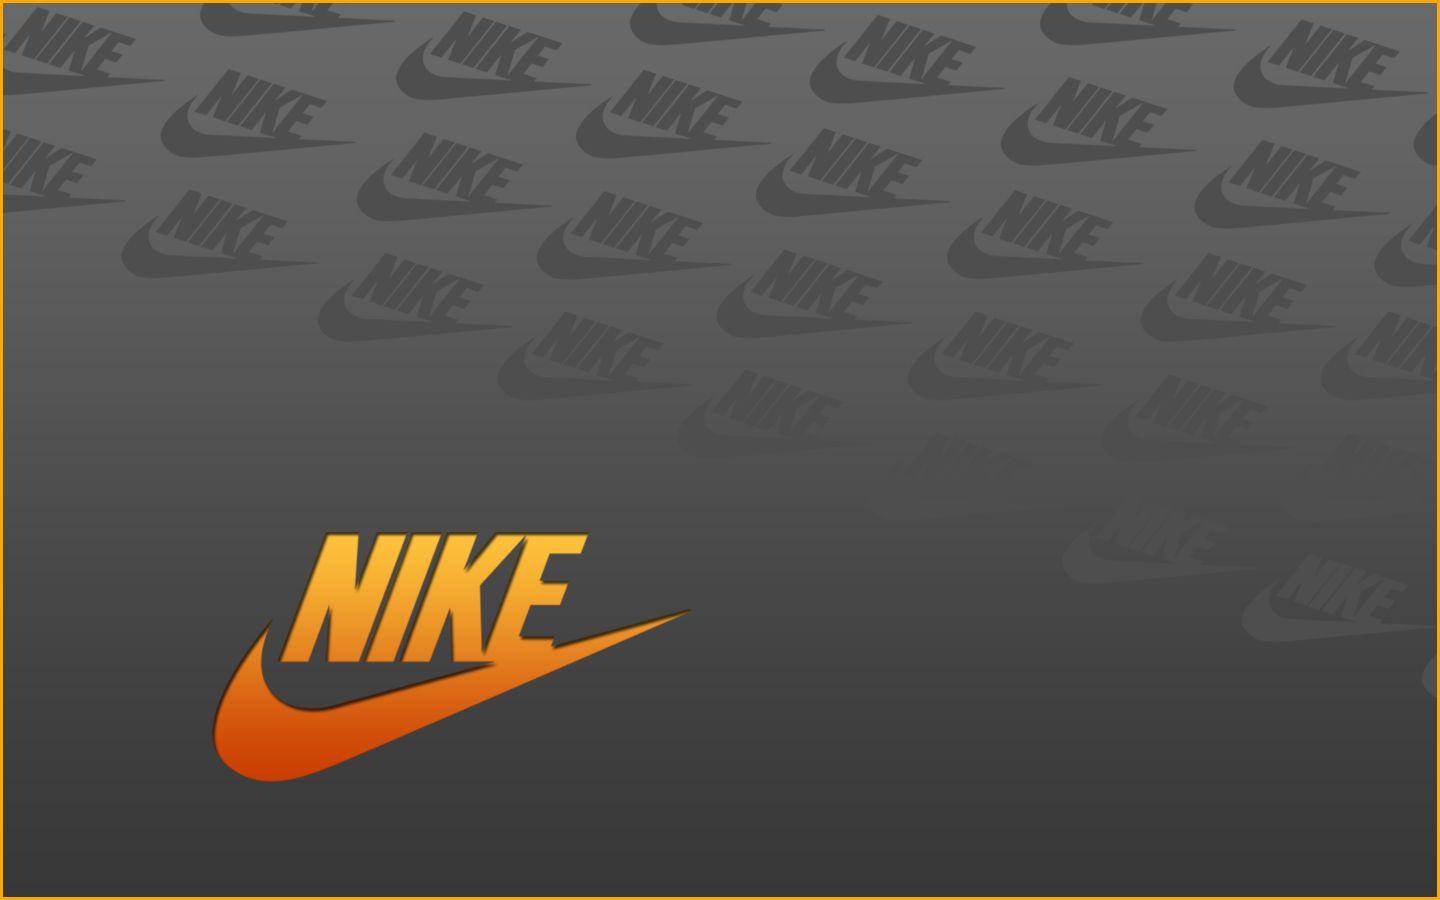 Neon Nike Sign Wallpaper Image & Picture